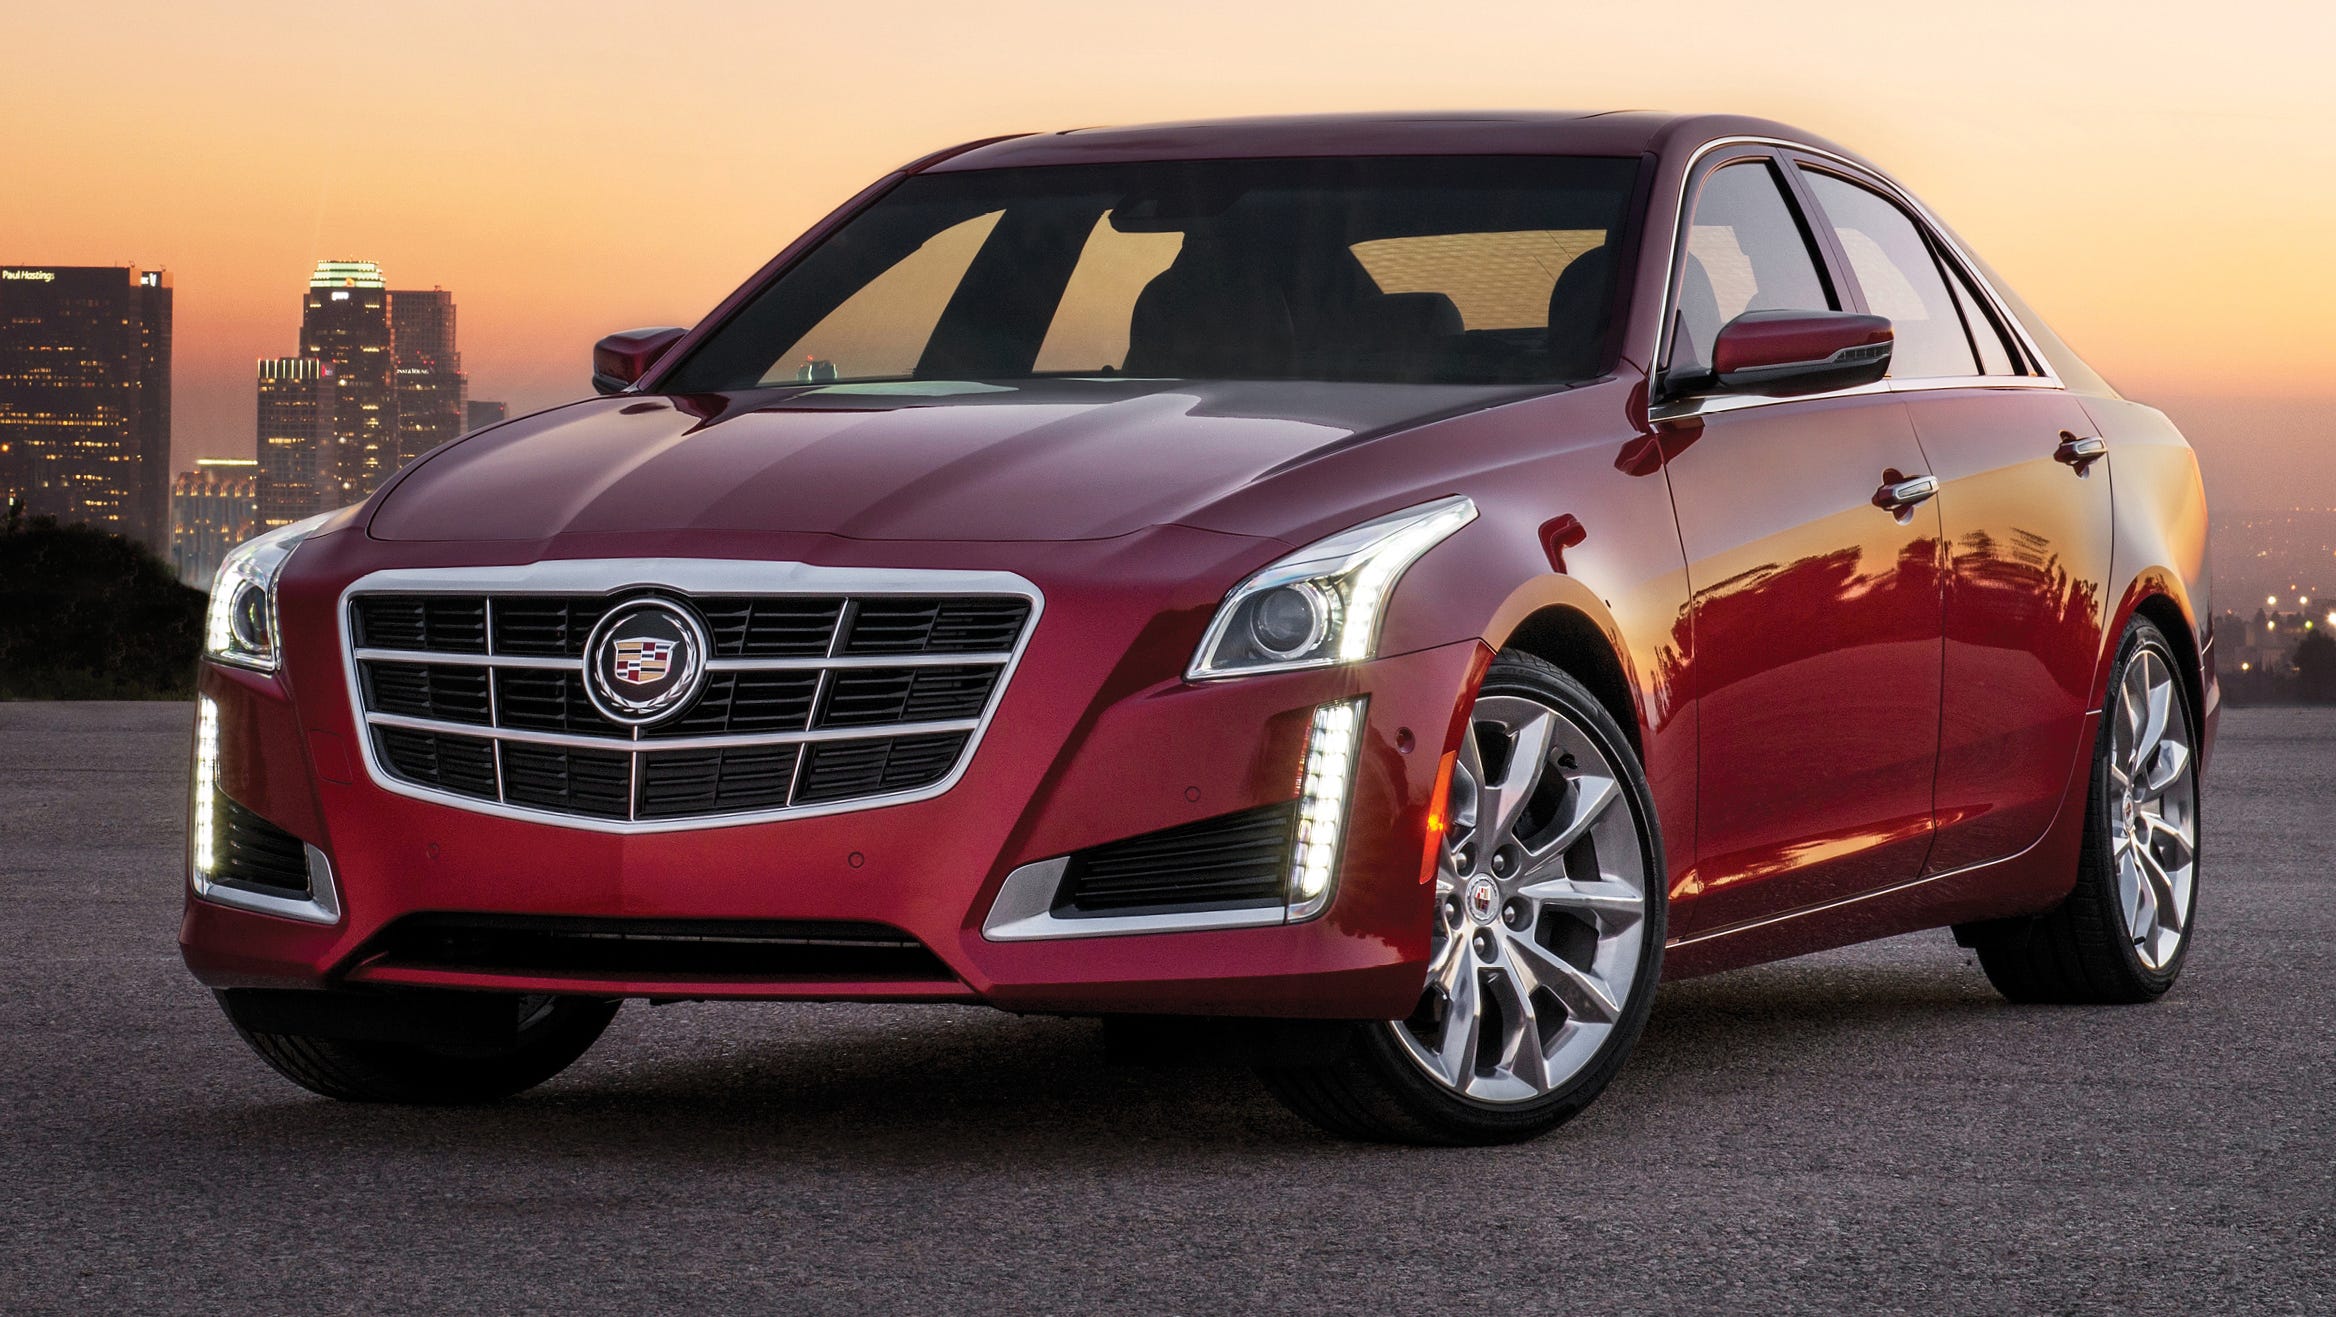 Auto review: Cadillac CTS whips the Germans